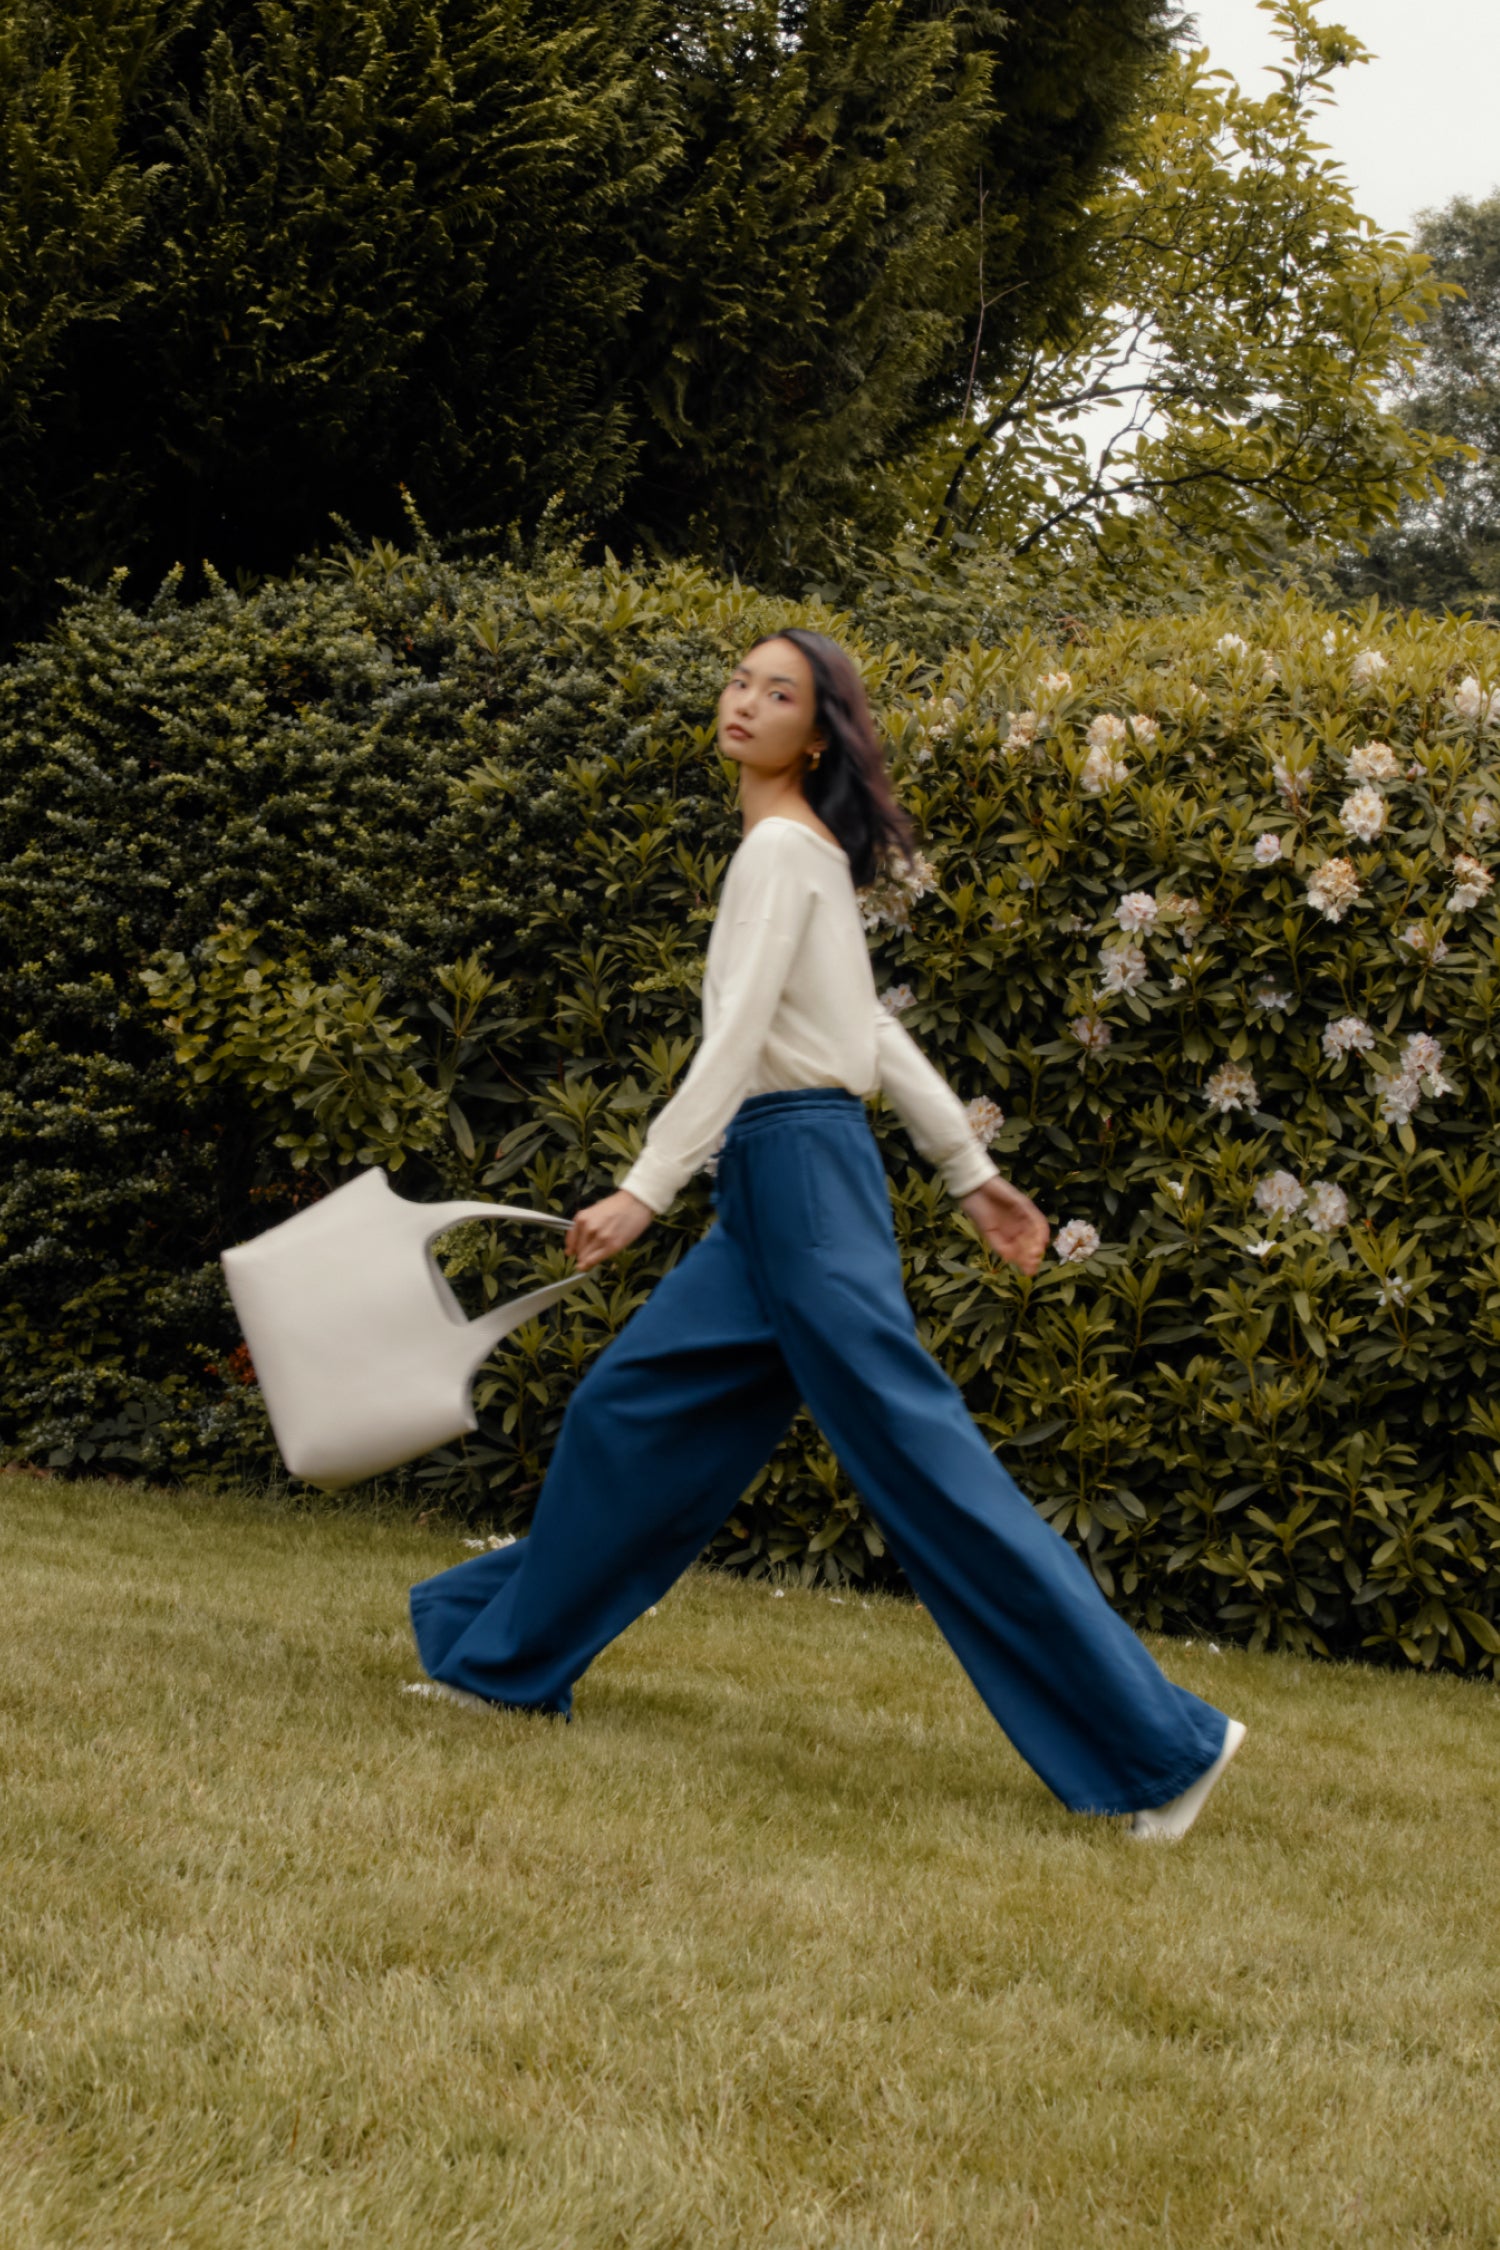 Woman walking in a garden holding a watering can.